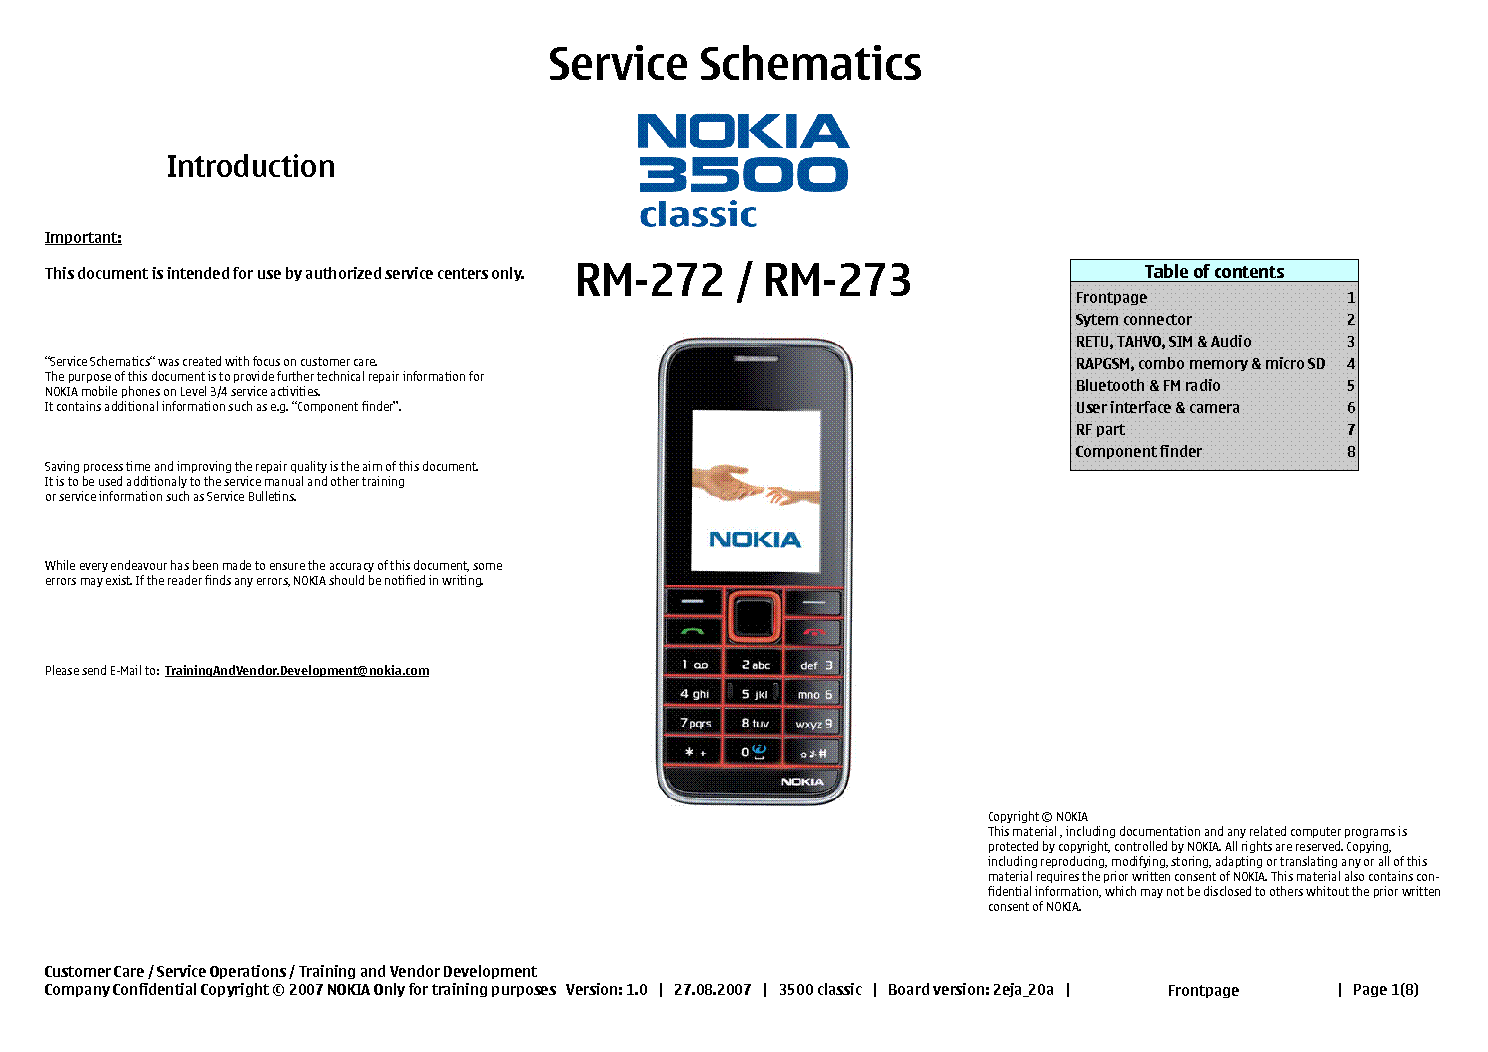 ... picture is a preview of NOKIA 3500C RM-272,RM-273 SERVICE SCHEMATICS